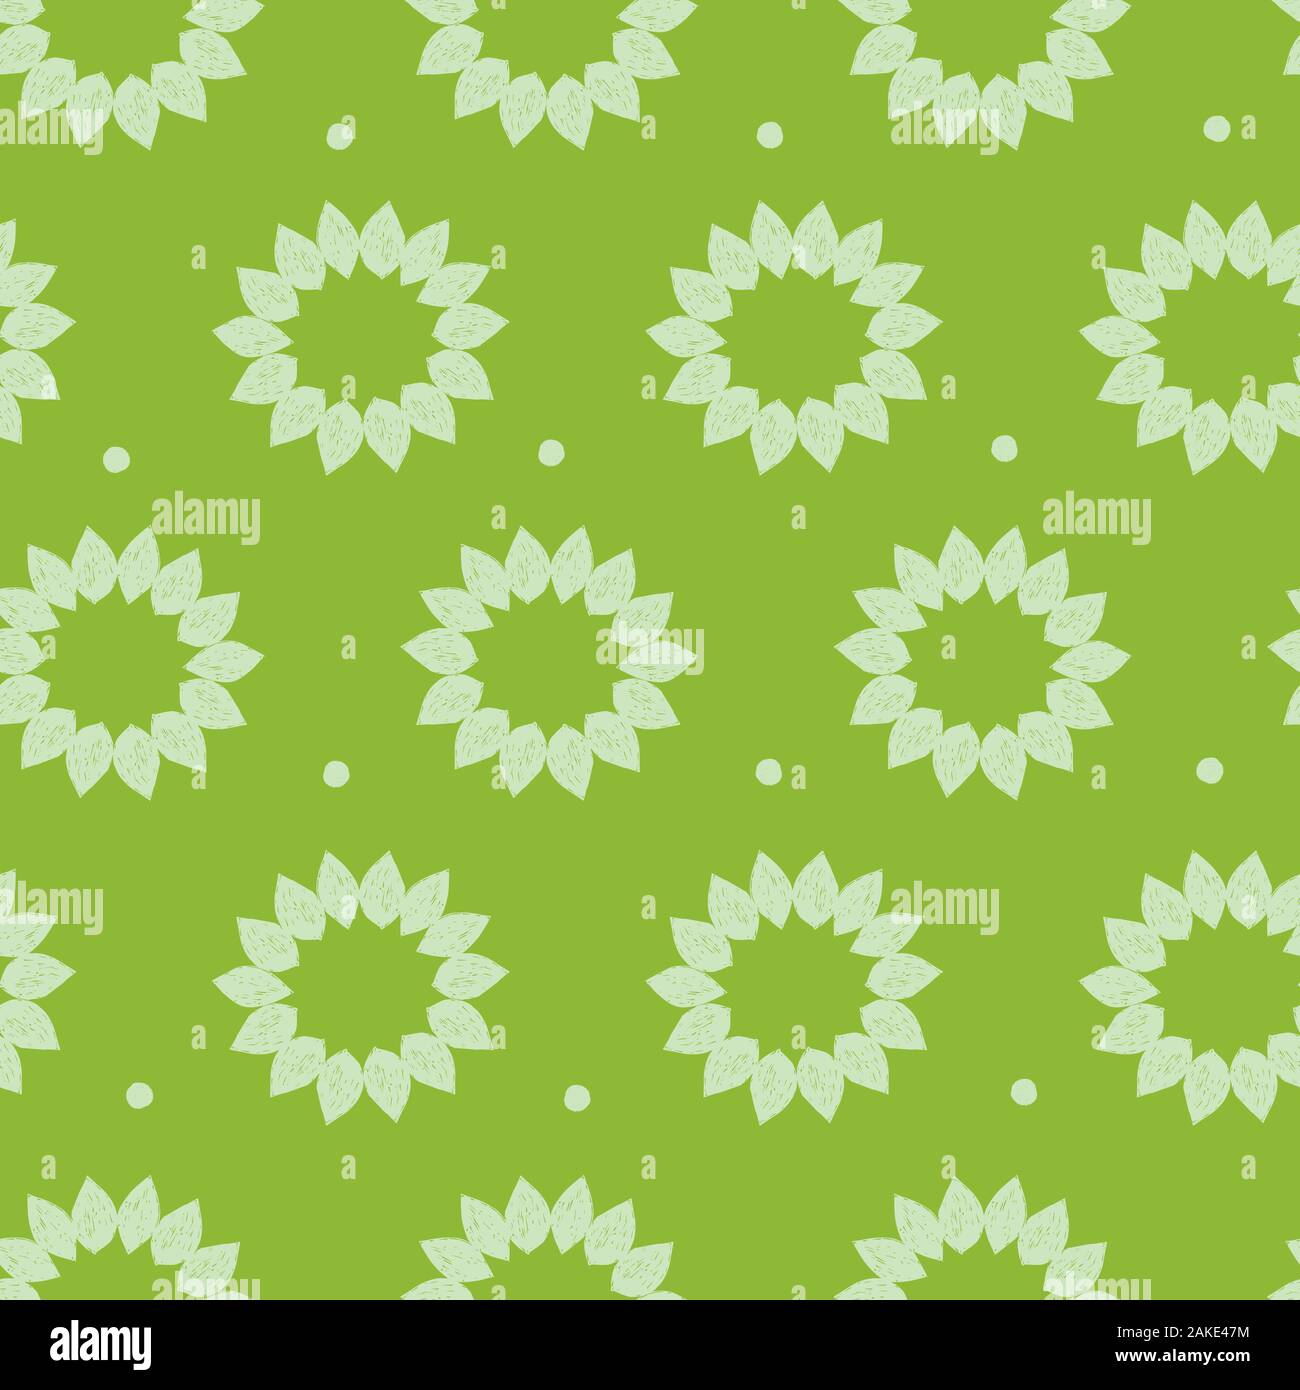 Vector green monochrome sunflower petal sketch repeat pattern. Suitable for textile, gift wrap, and wallpaper. Stock Vector